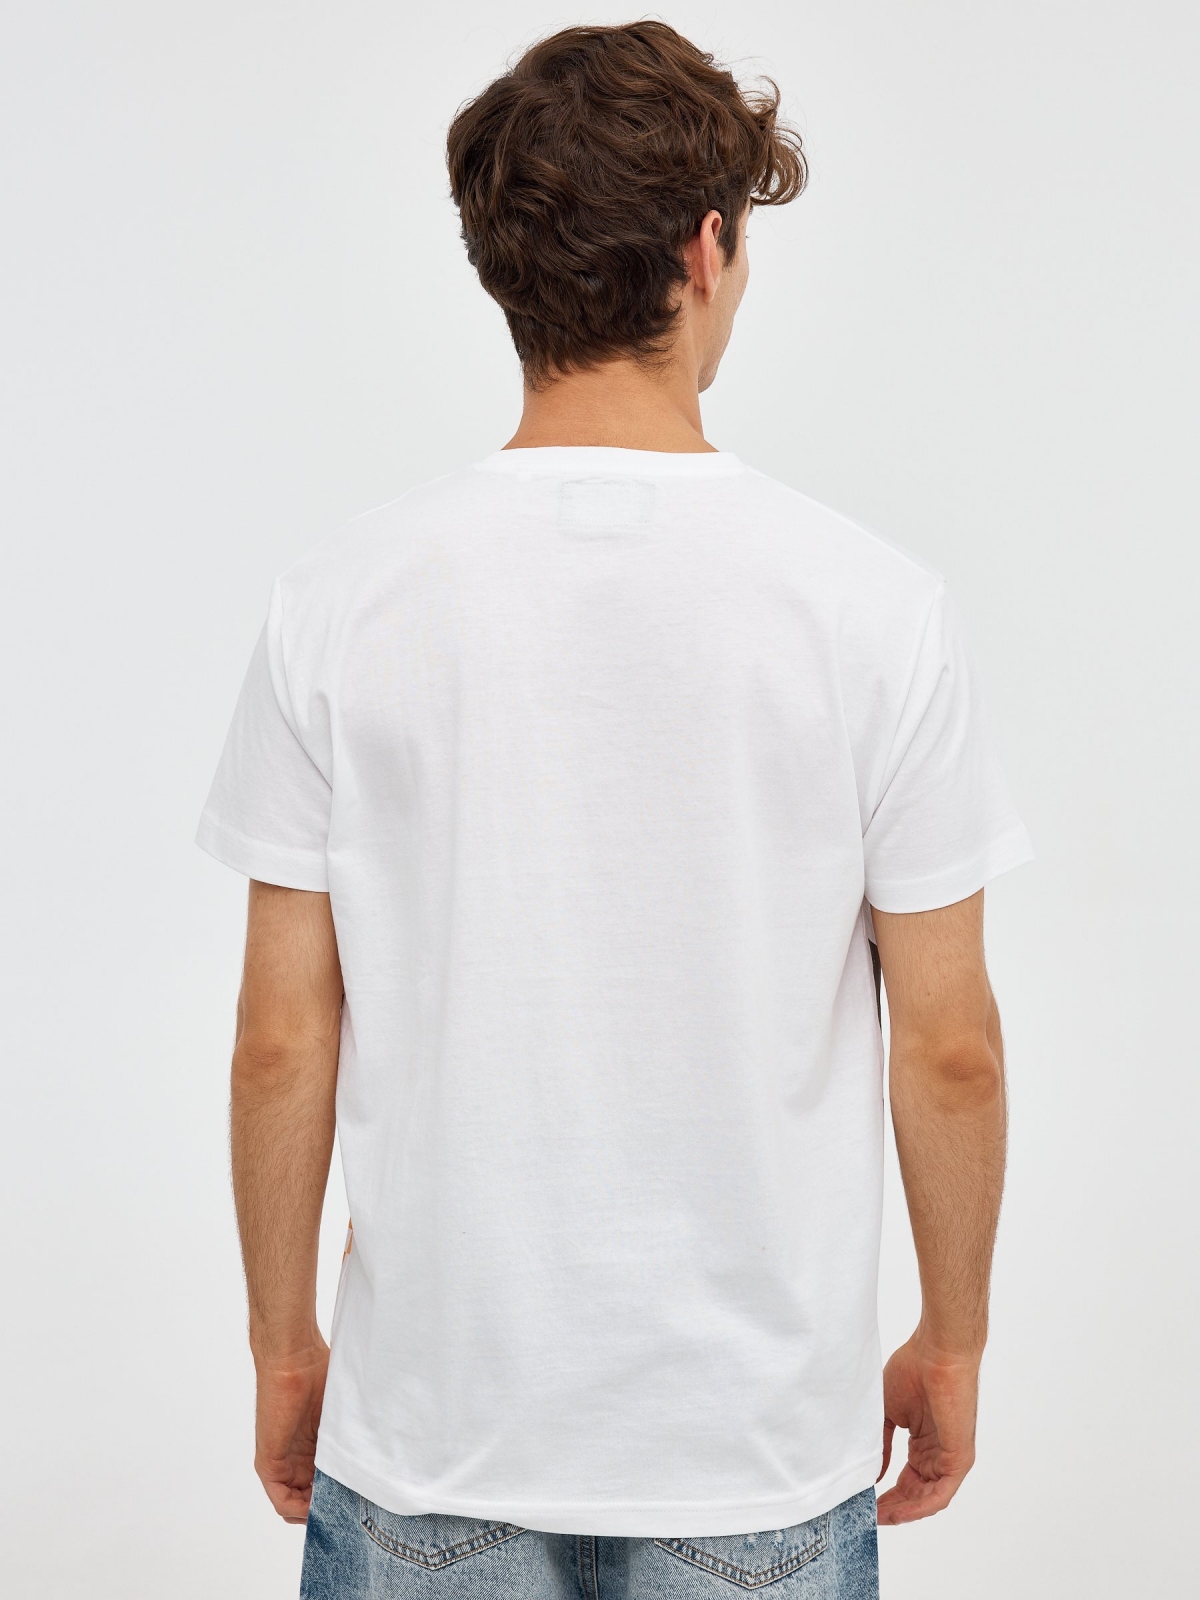 INSIDE print T-shirt white middle back view